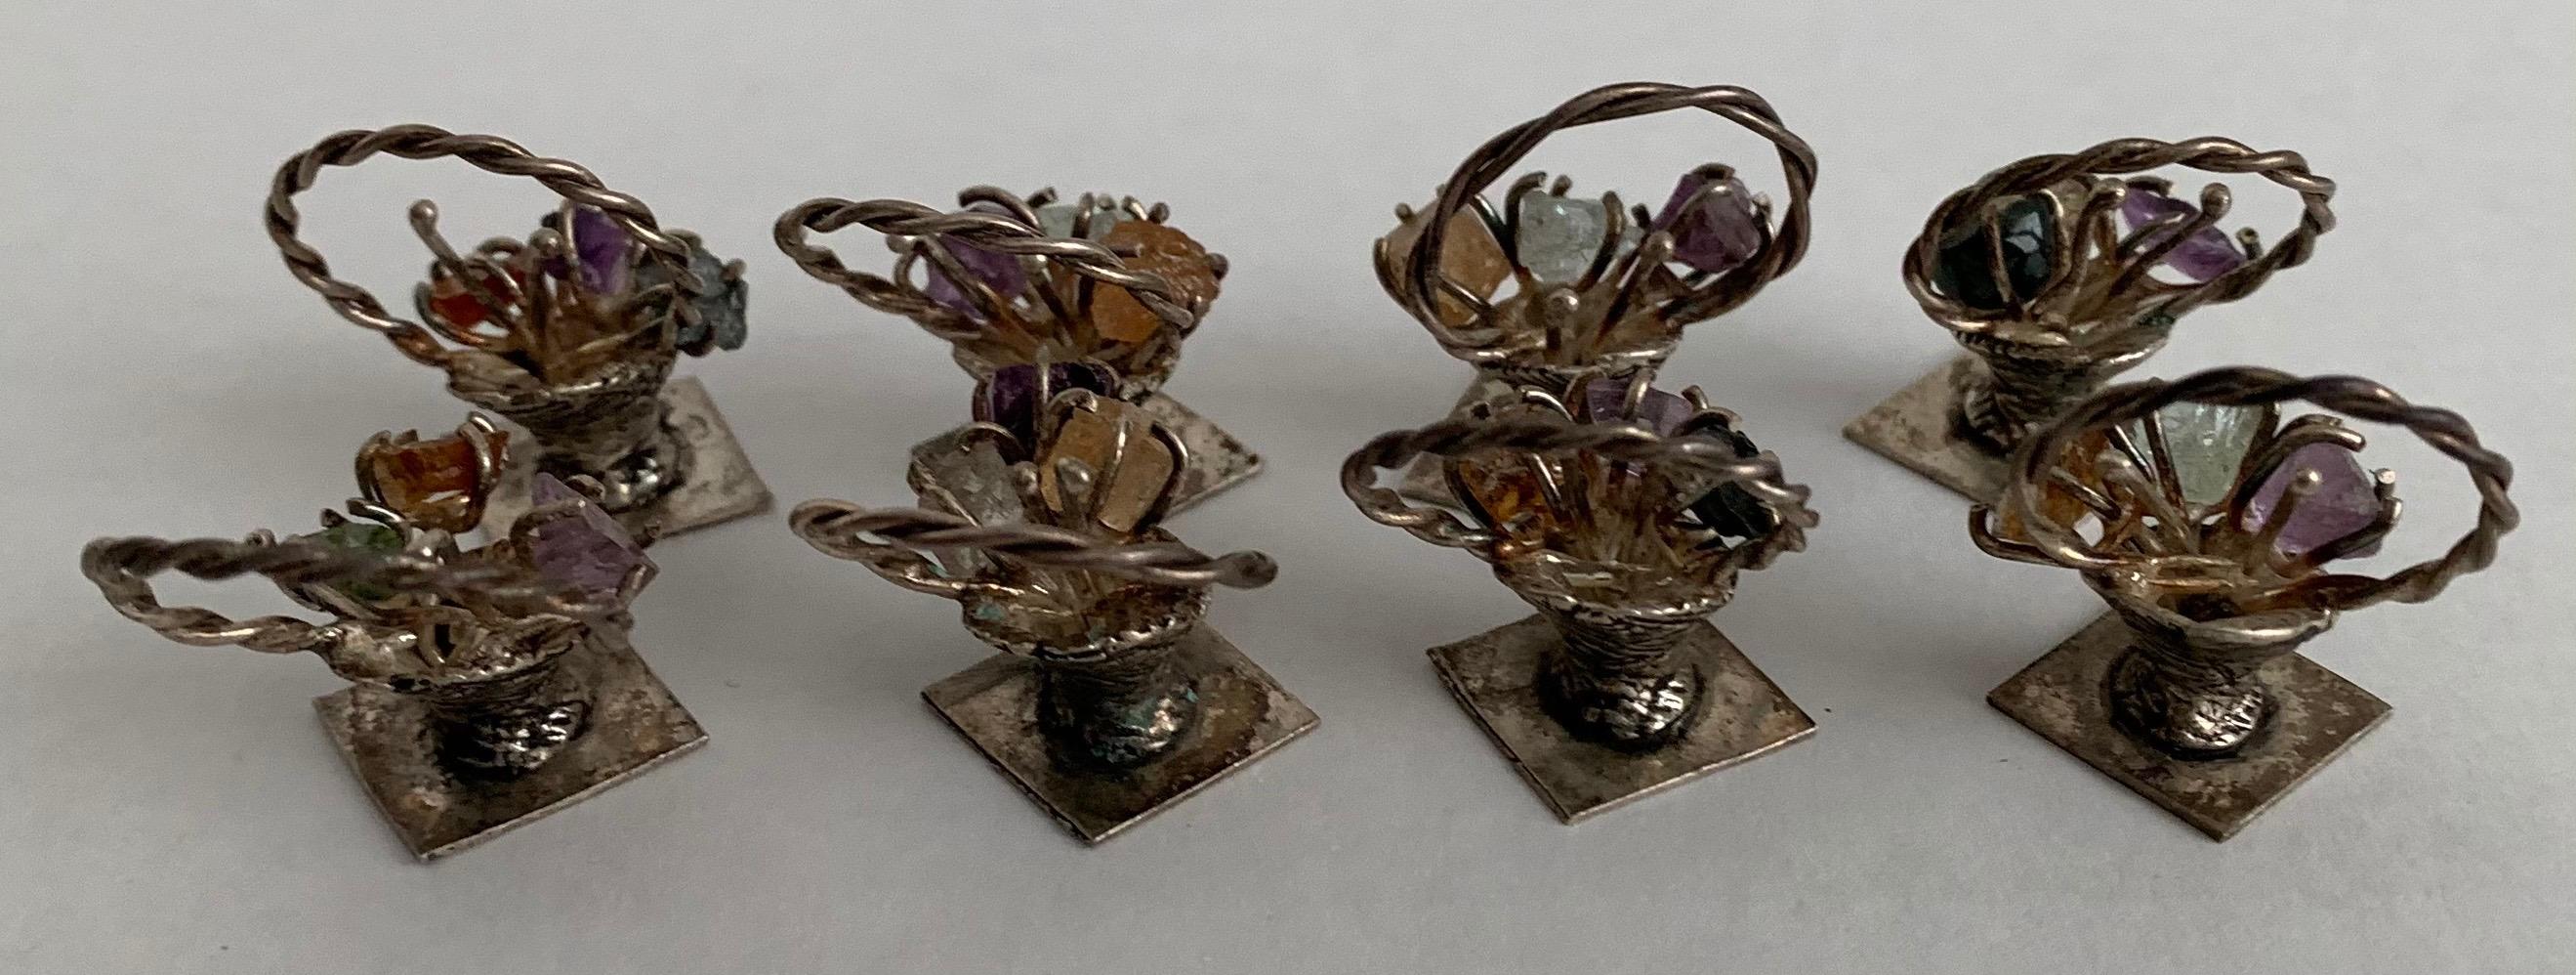 20th Century Silver Flower Basket Place Card Holders Set of 6 For Sale